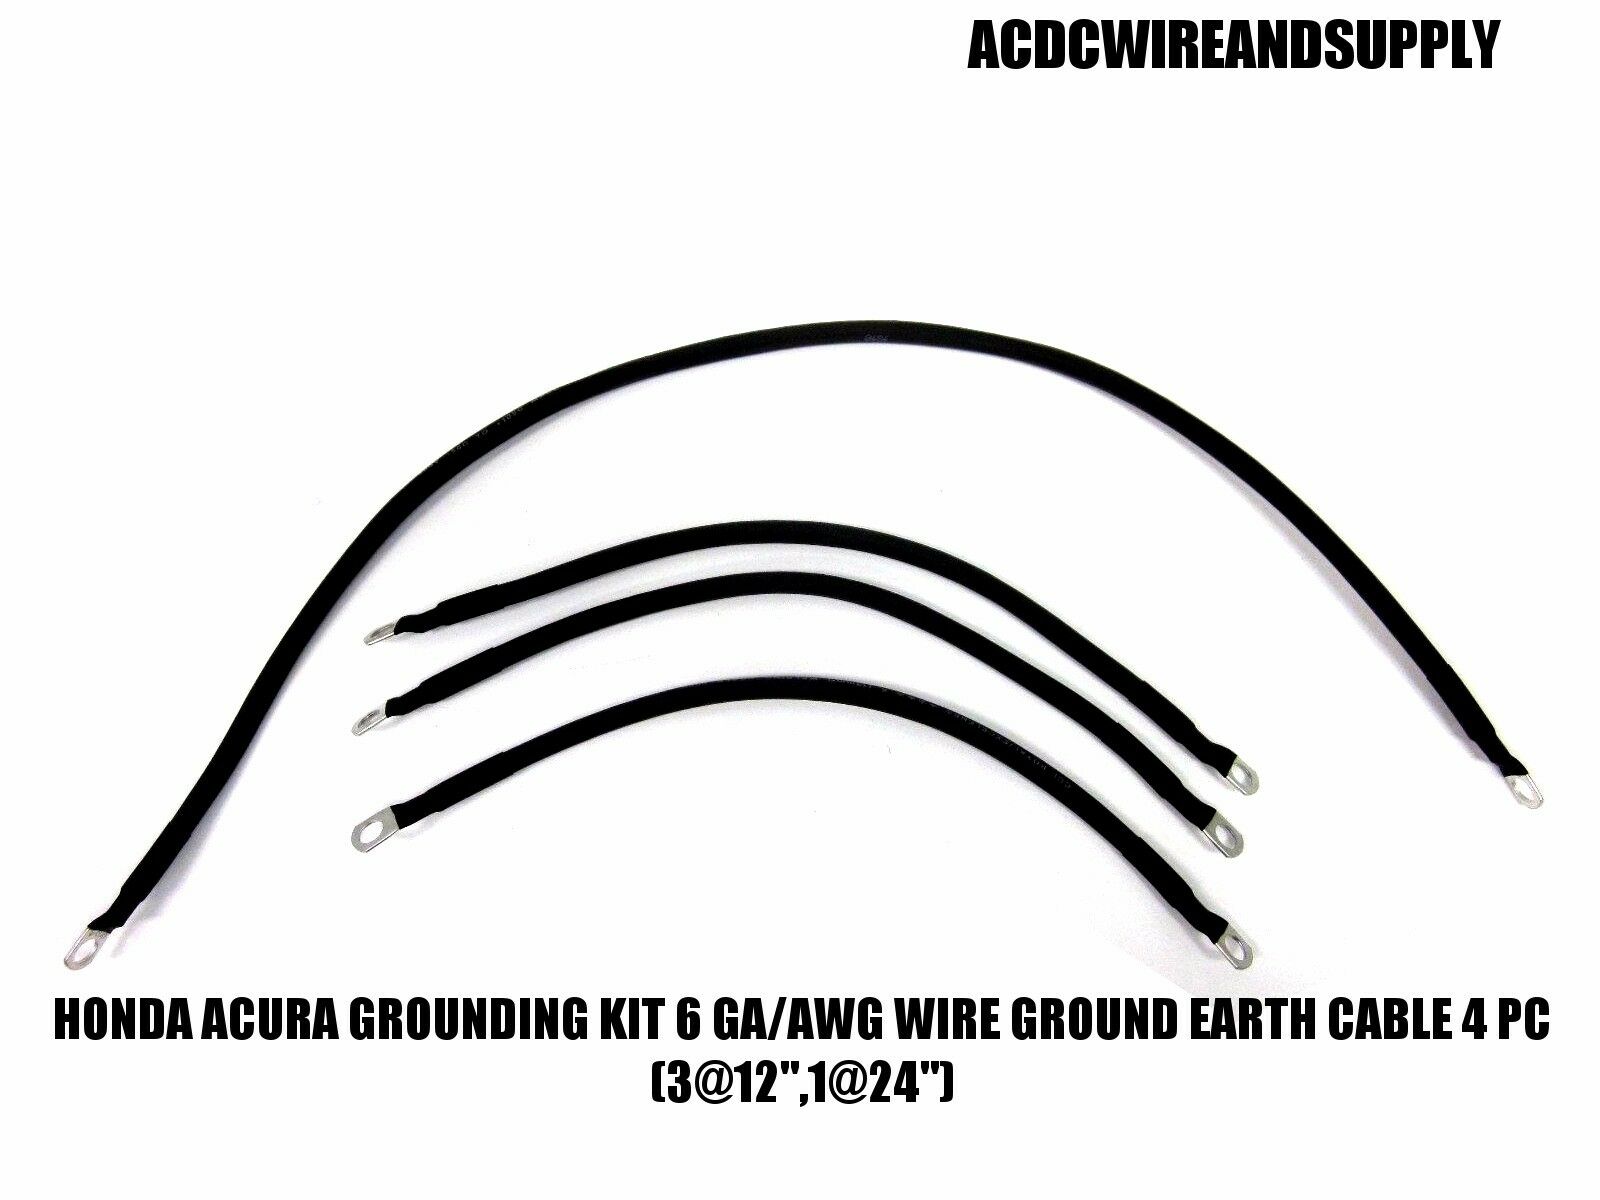 Honda Acura Grounding Kit # 6 Gauge Wire Ground Earth Cable 4 Pc (3@12",1@24")